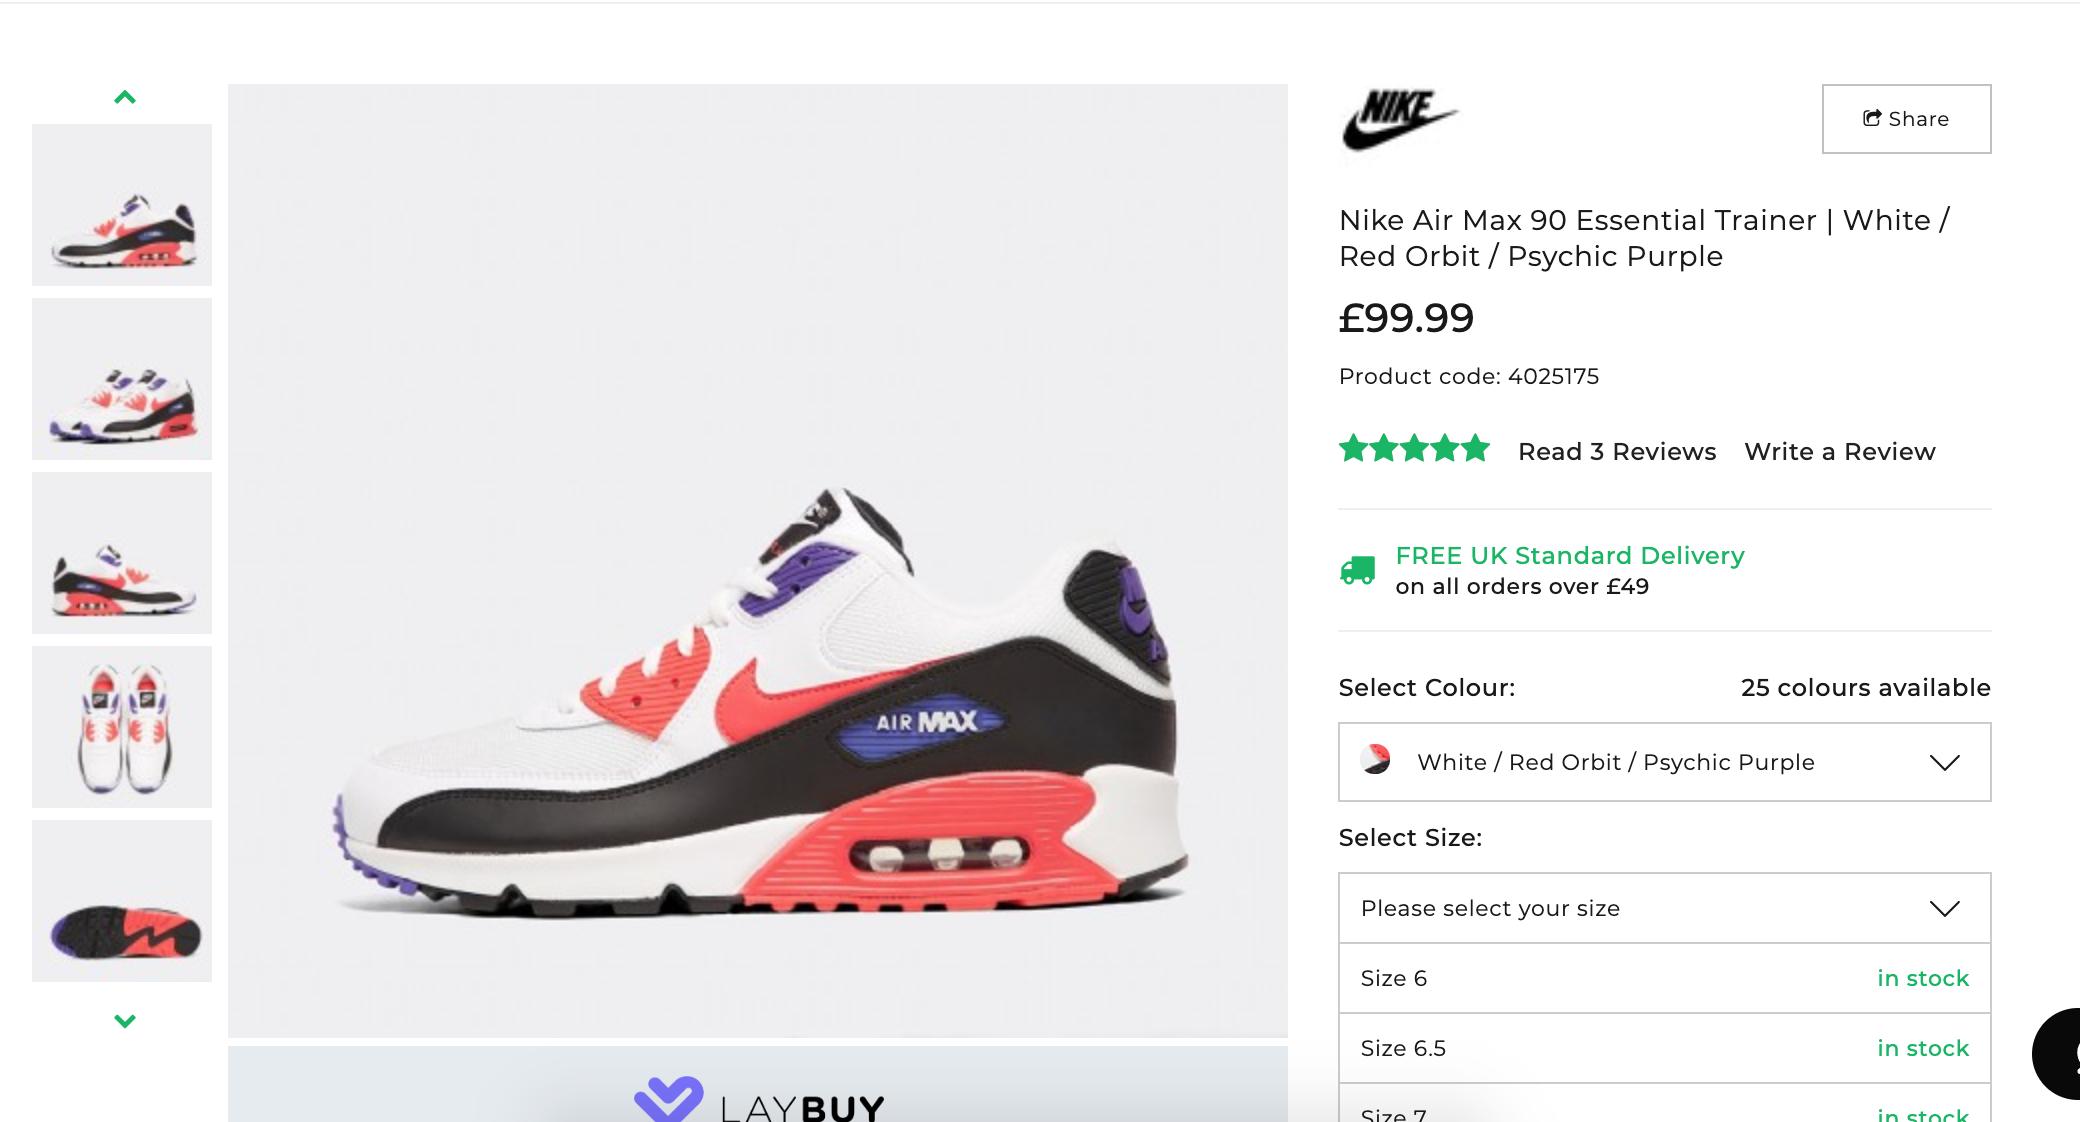 Verval huisvrouw Knipoog The Sole Restocks on Twitter: "Nike Air Max 90 Raptors. Now live at  Footasylum! Link &gt; https://t.co/TBom2fHrBG https://t.co/yz2mphksFe" /  Twitter